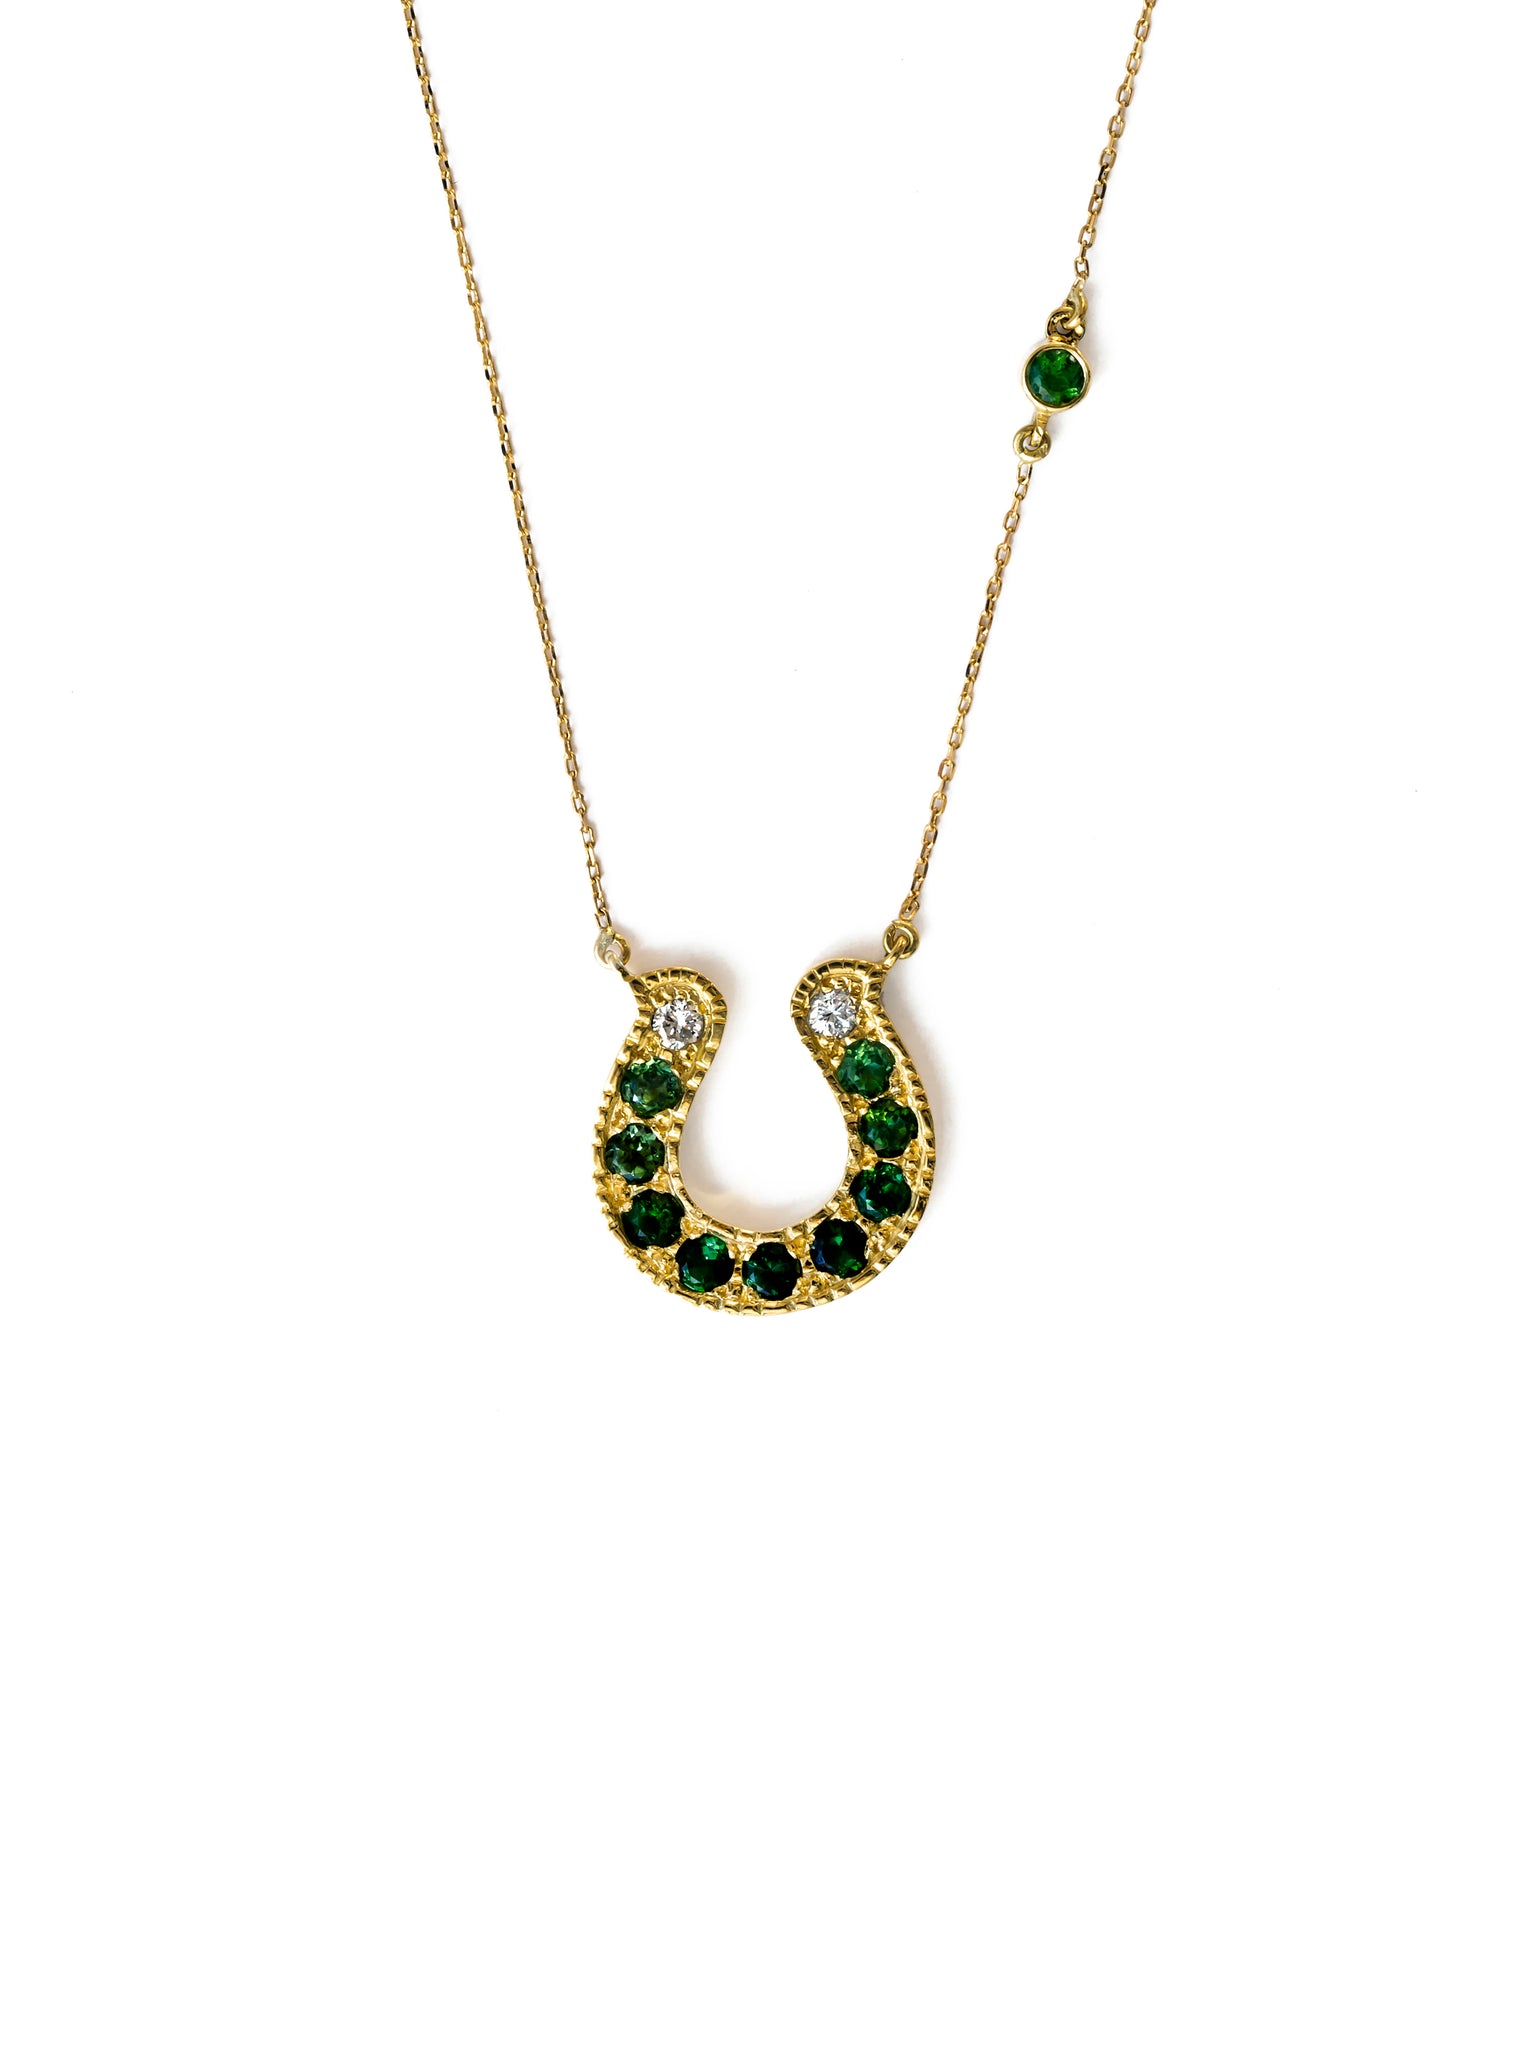 Horseshoe Necklace with Green Tourmaline and Diamond Ombre